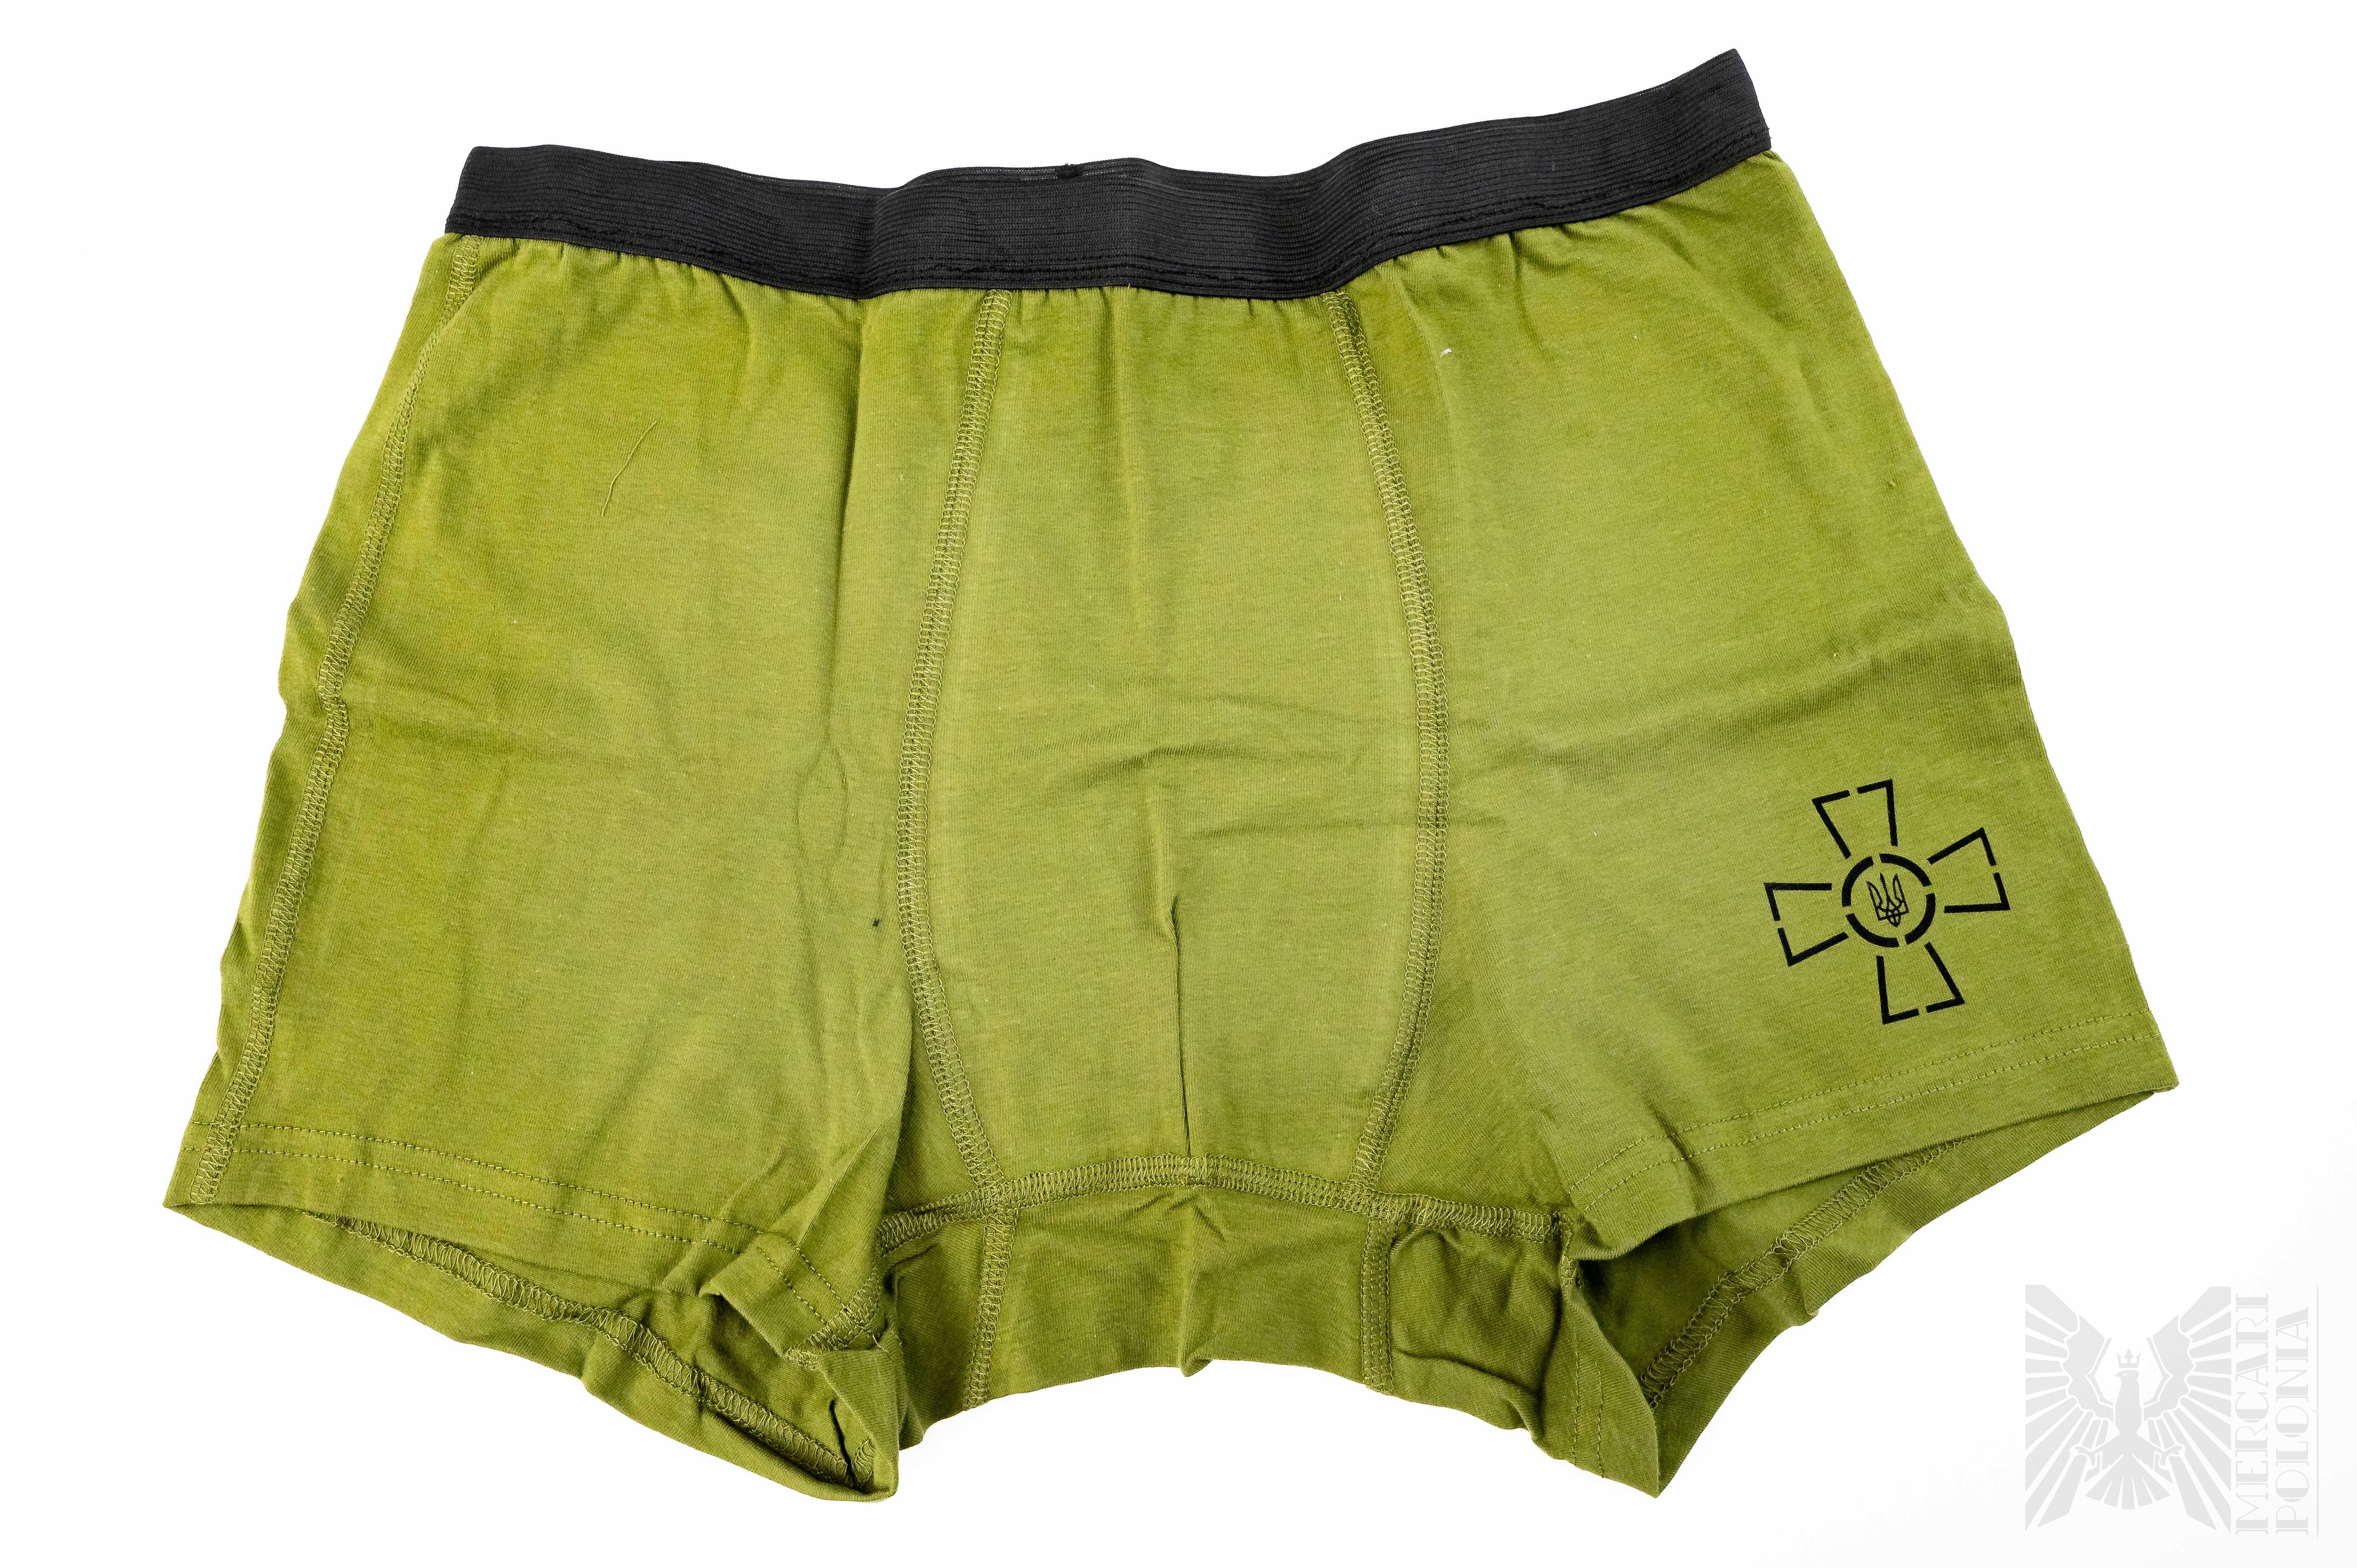 War in Ukraine - Military Underwear of the Soldier of the Armed